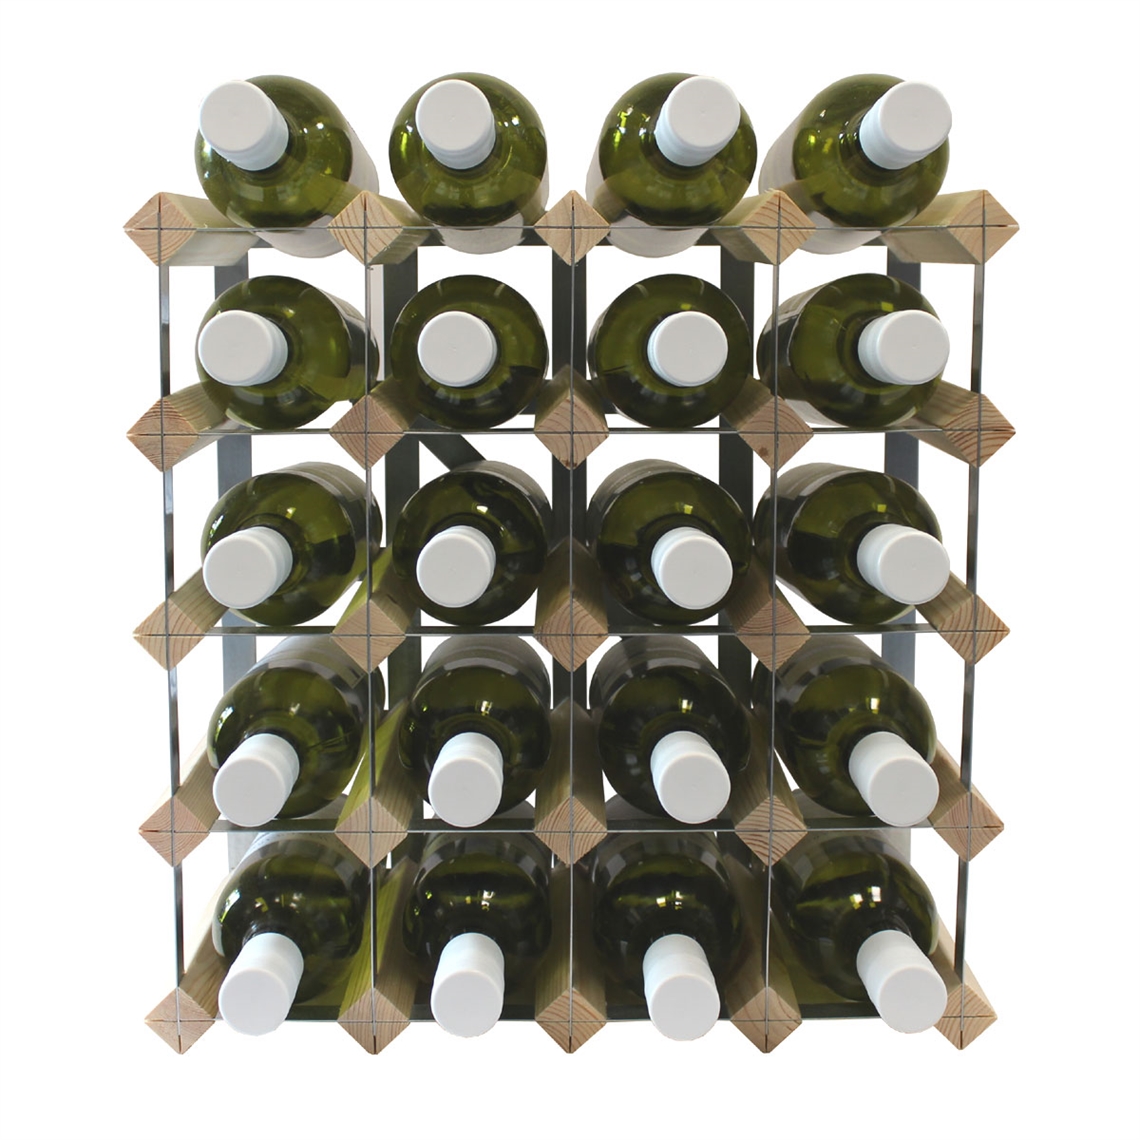 View more wooden wine rack buying guide from our Assembled Wine Racks range